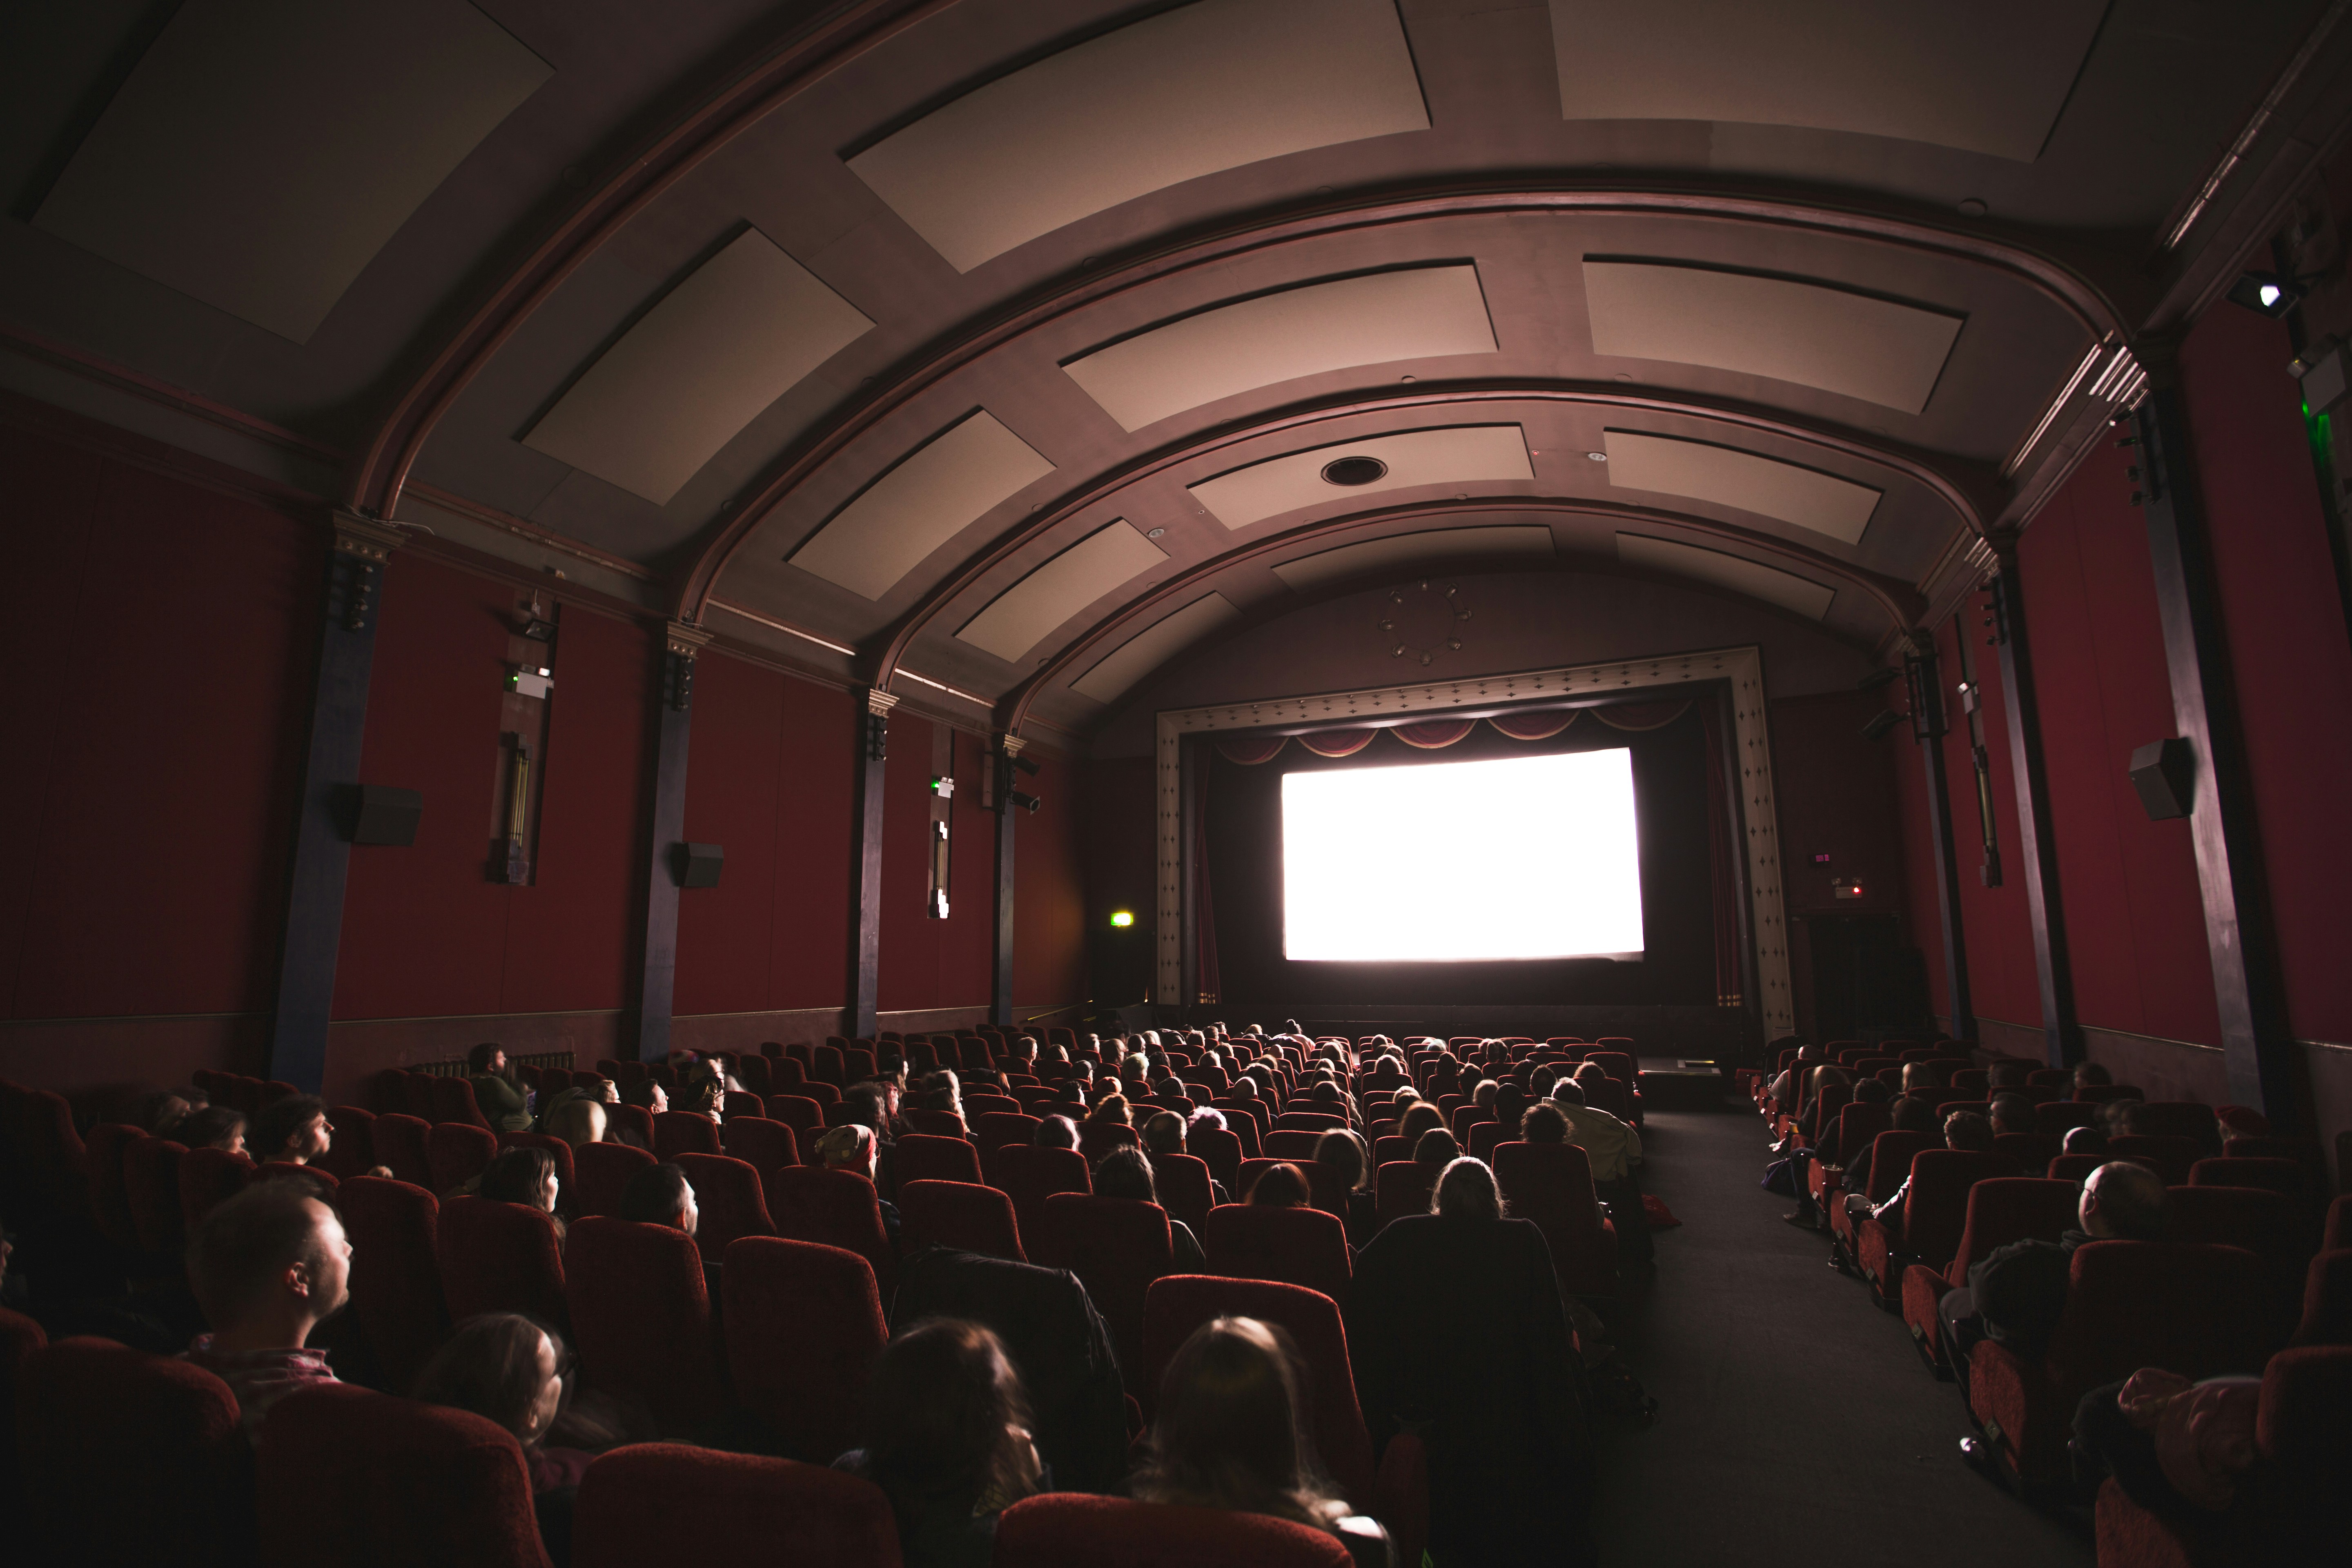 An audience views a projector screen in a dark auditorium.